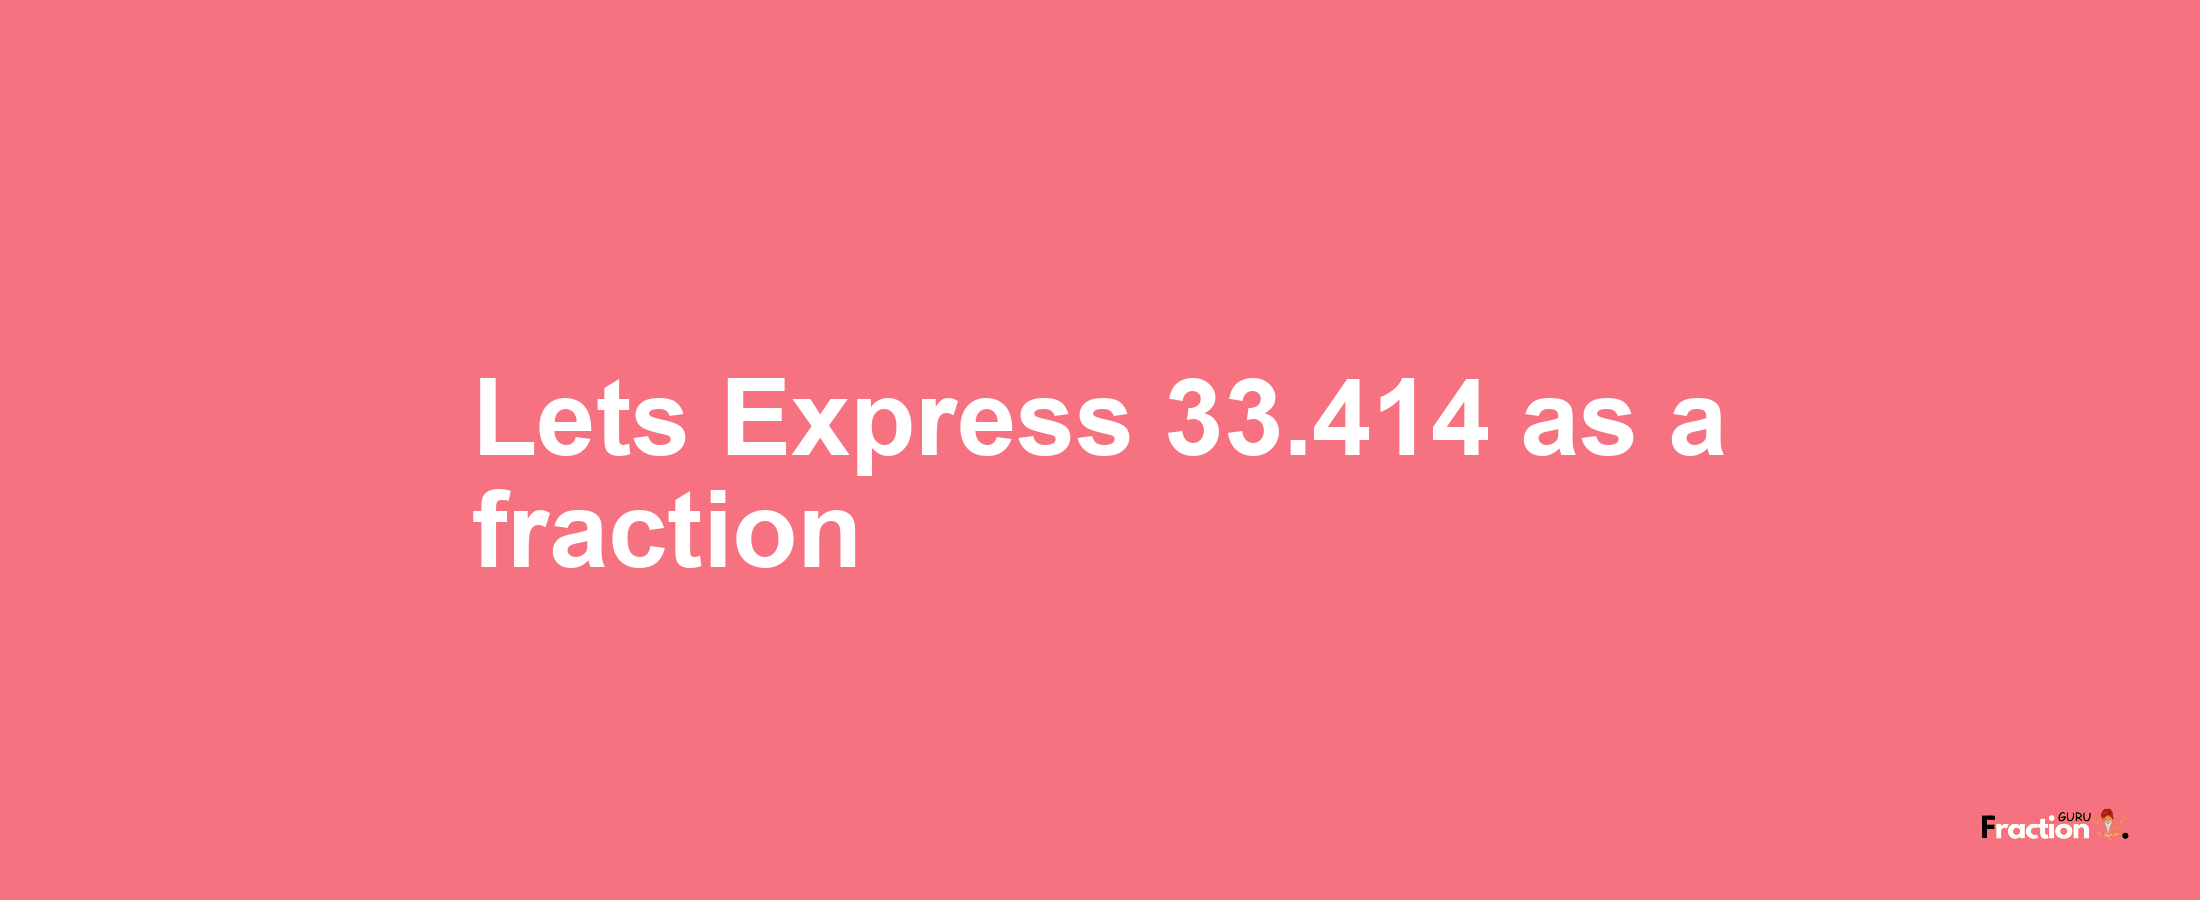 Lets Express 33.414 as afraction